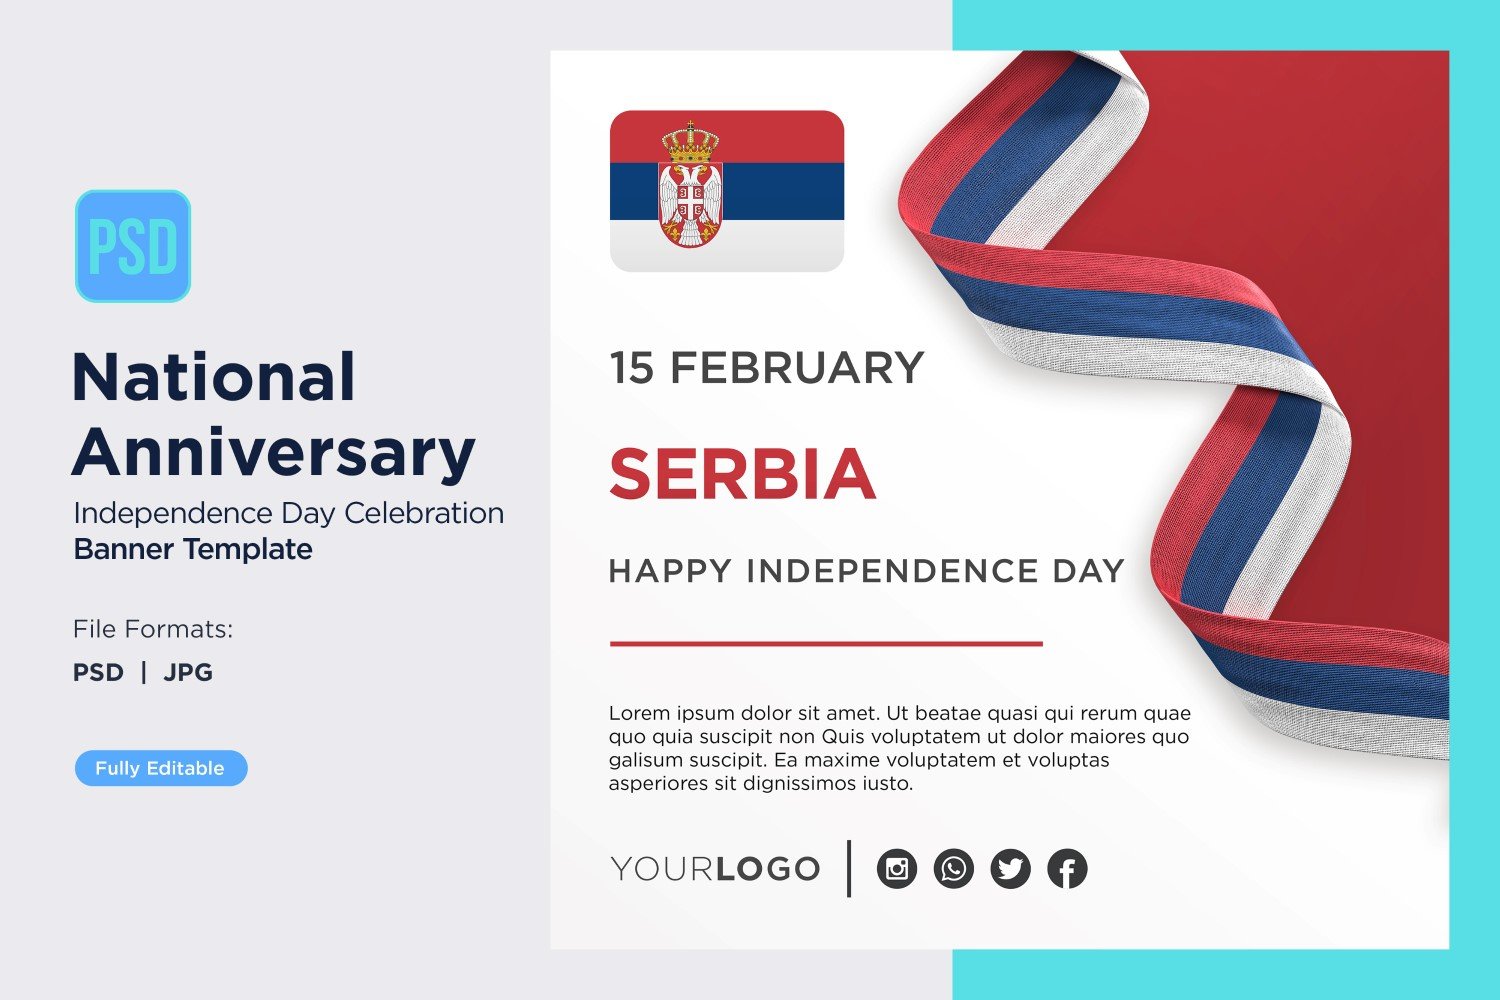 Template #402944 Day Celebration Webdesign Template - Logo template Preview